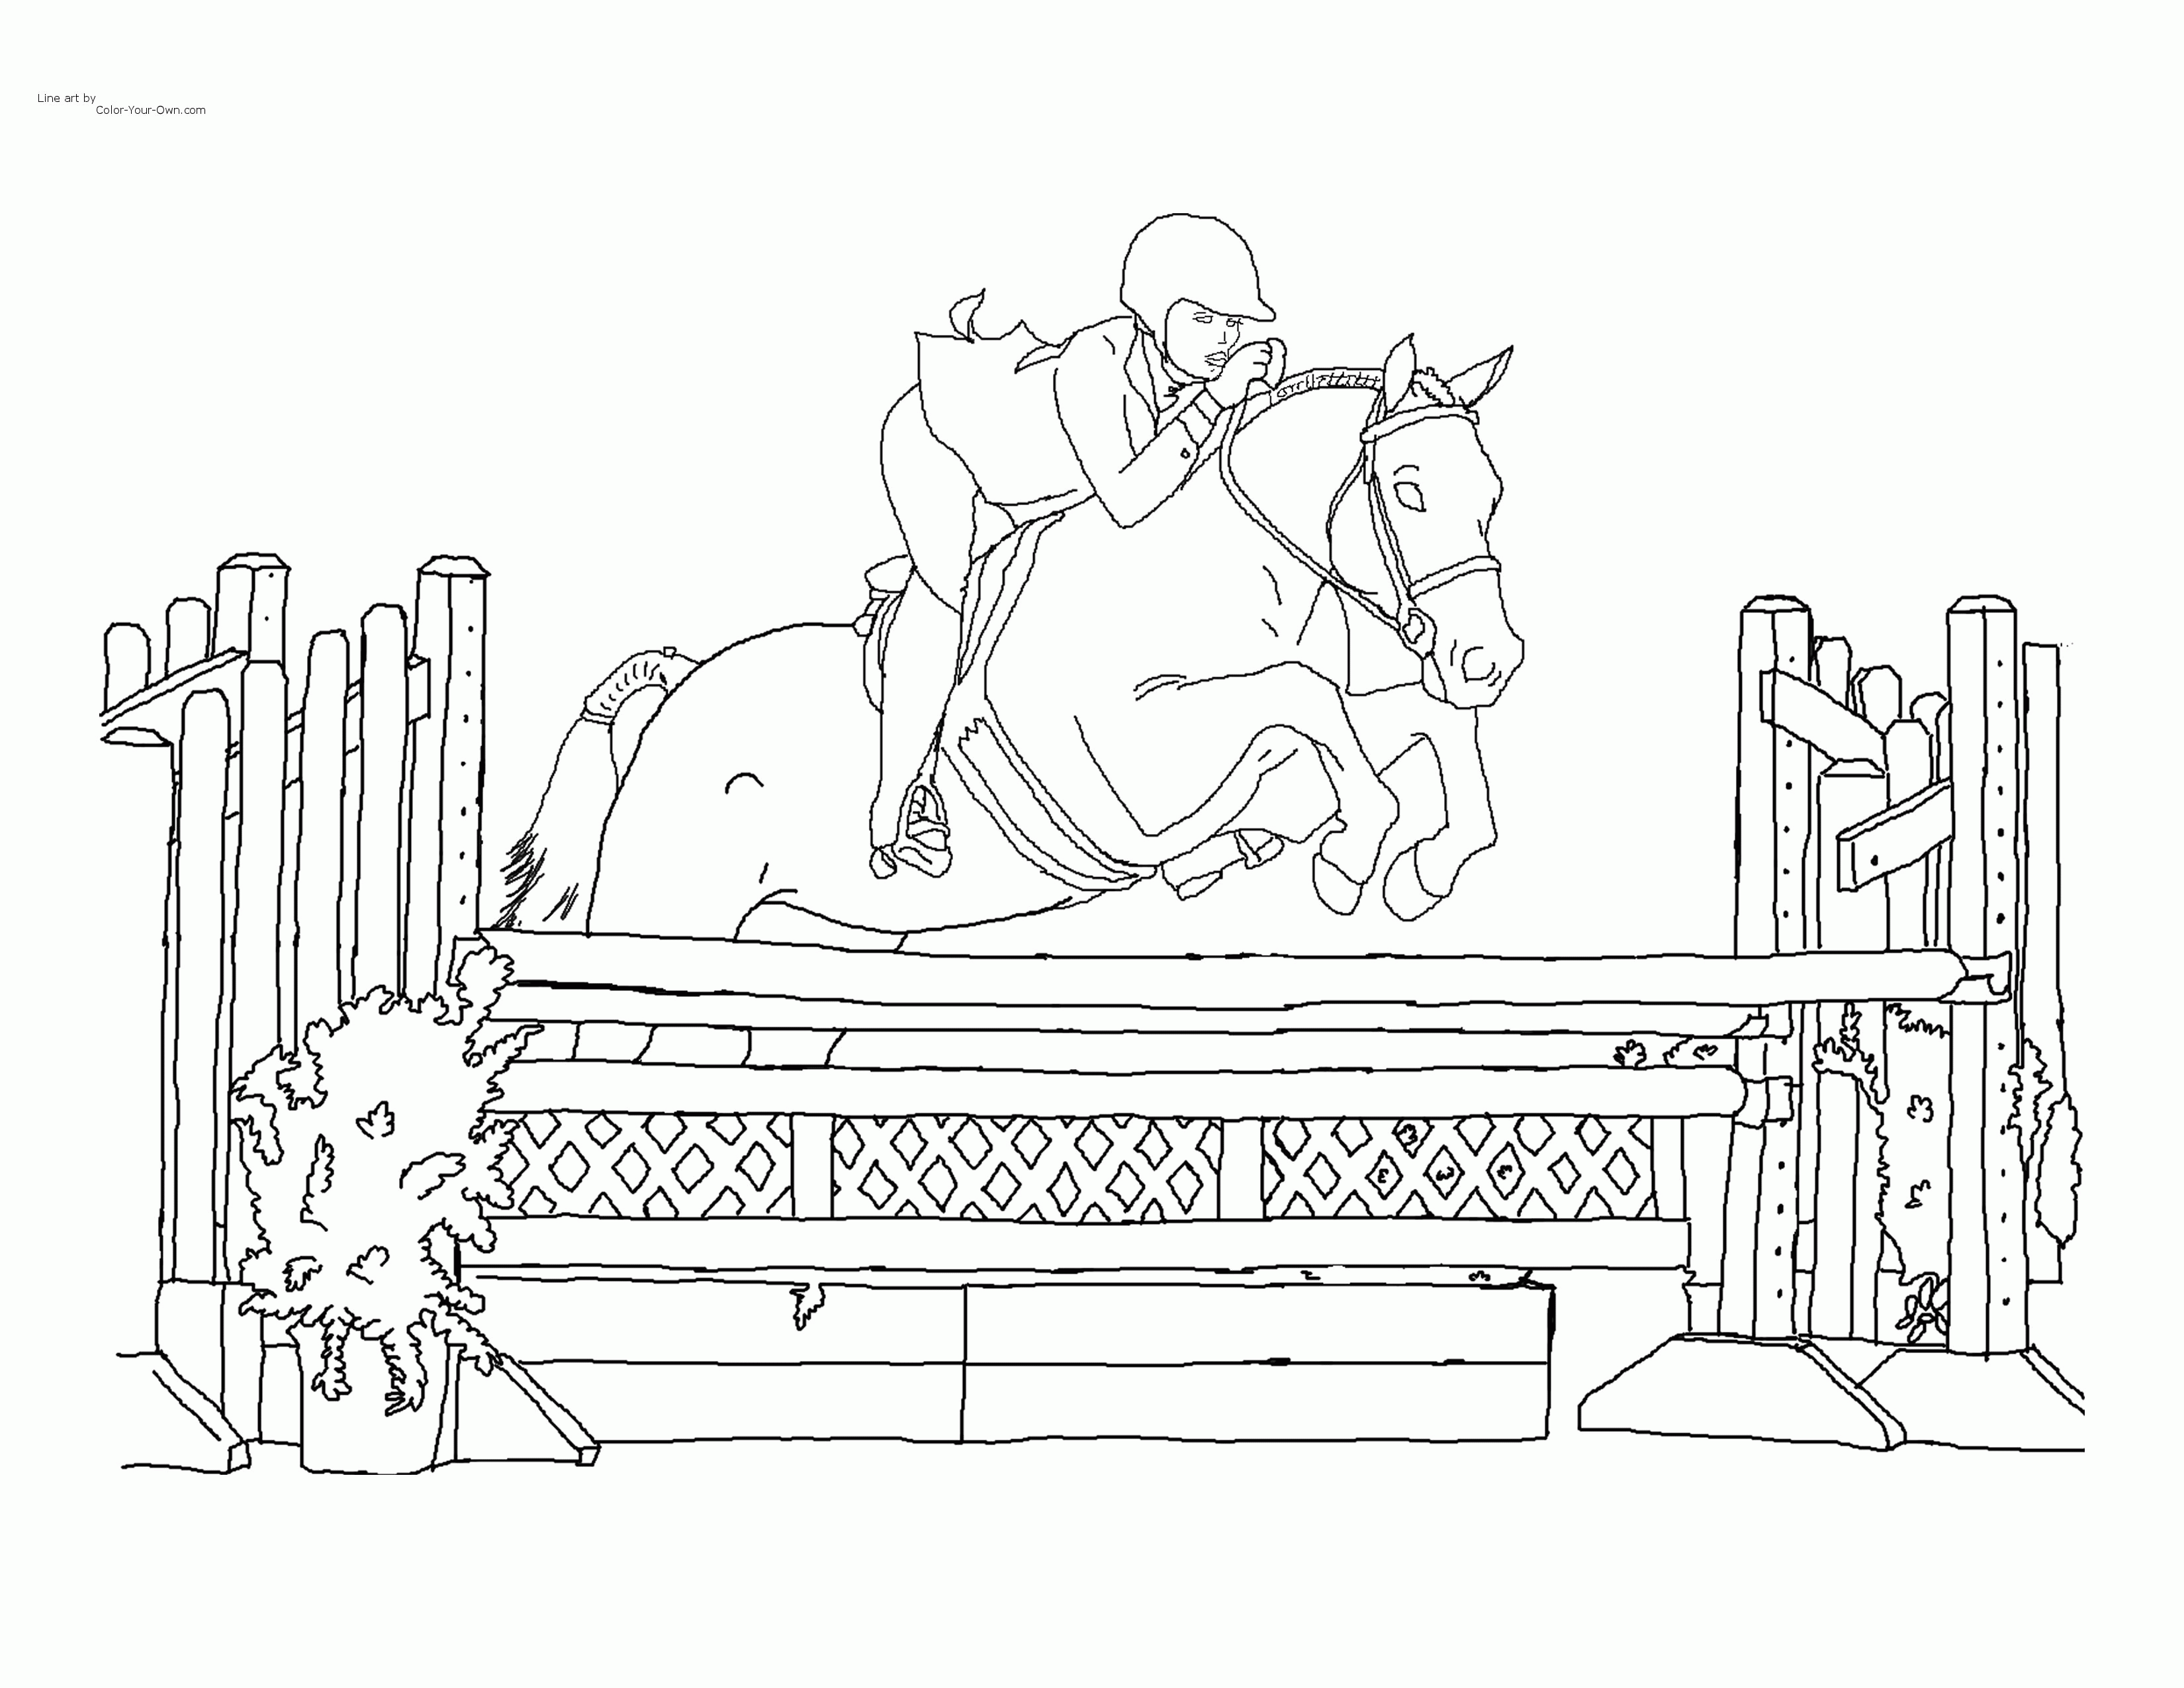 printable coloring pages horse show coloring home